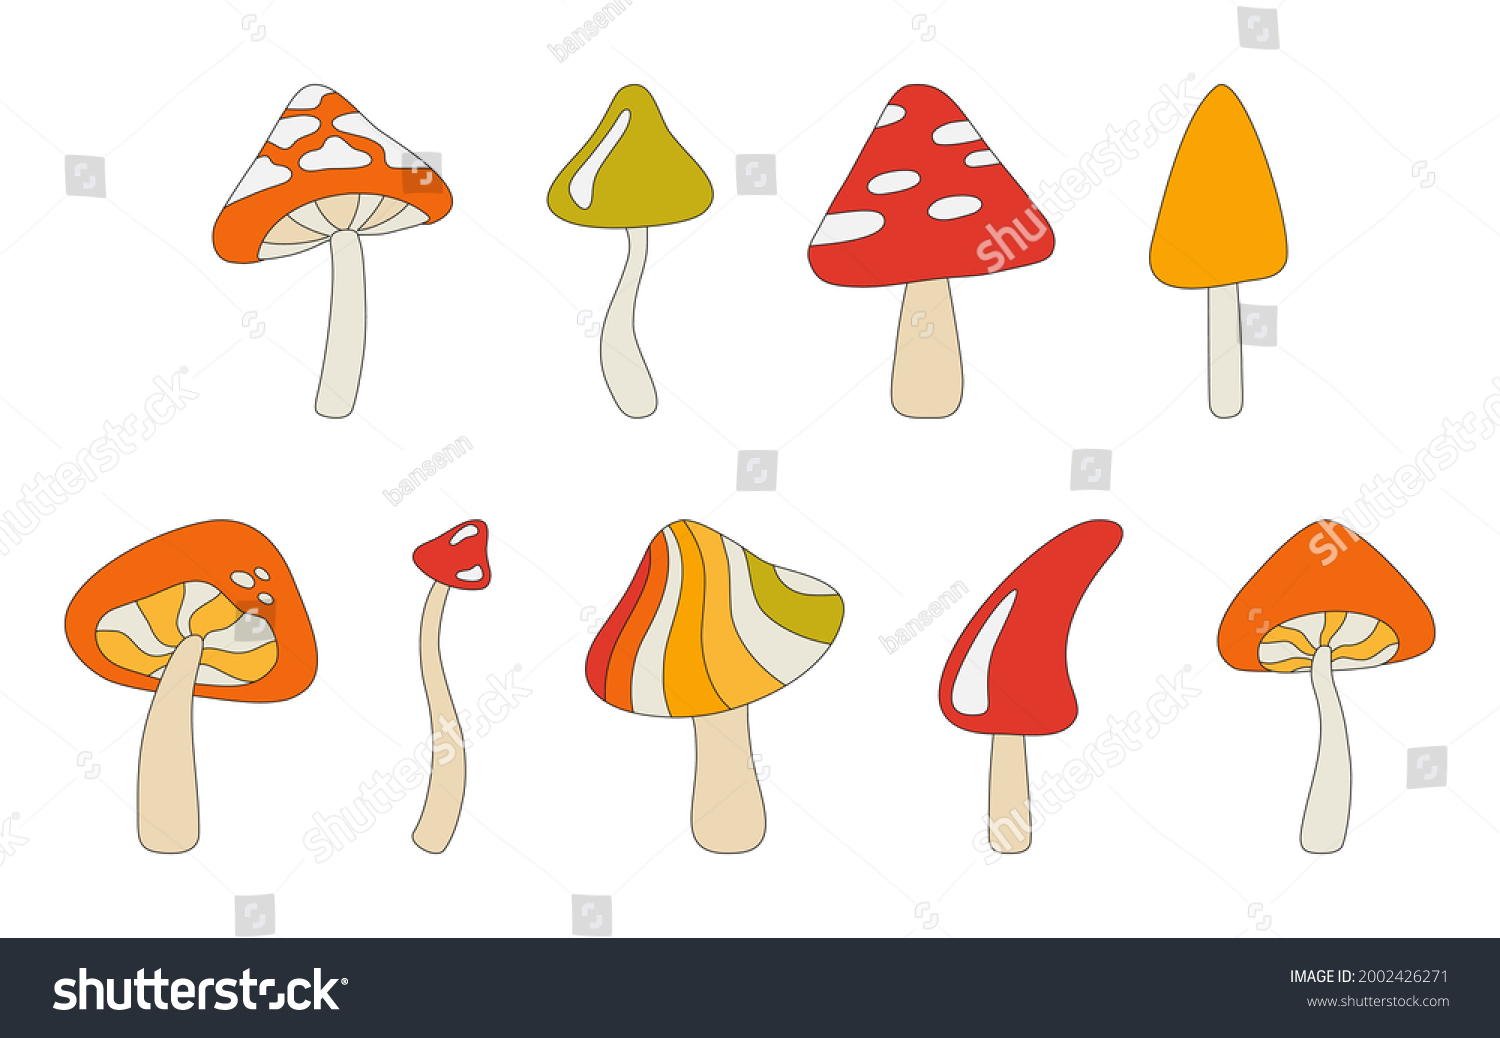 Set of mushrooms in the style of the 70s. Psychedelic abstract mushrooms, hippie style. Vector illustration isolated on a white background. #2002426271